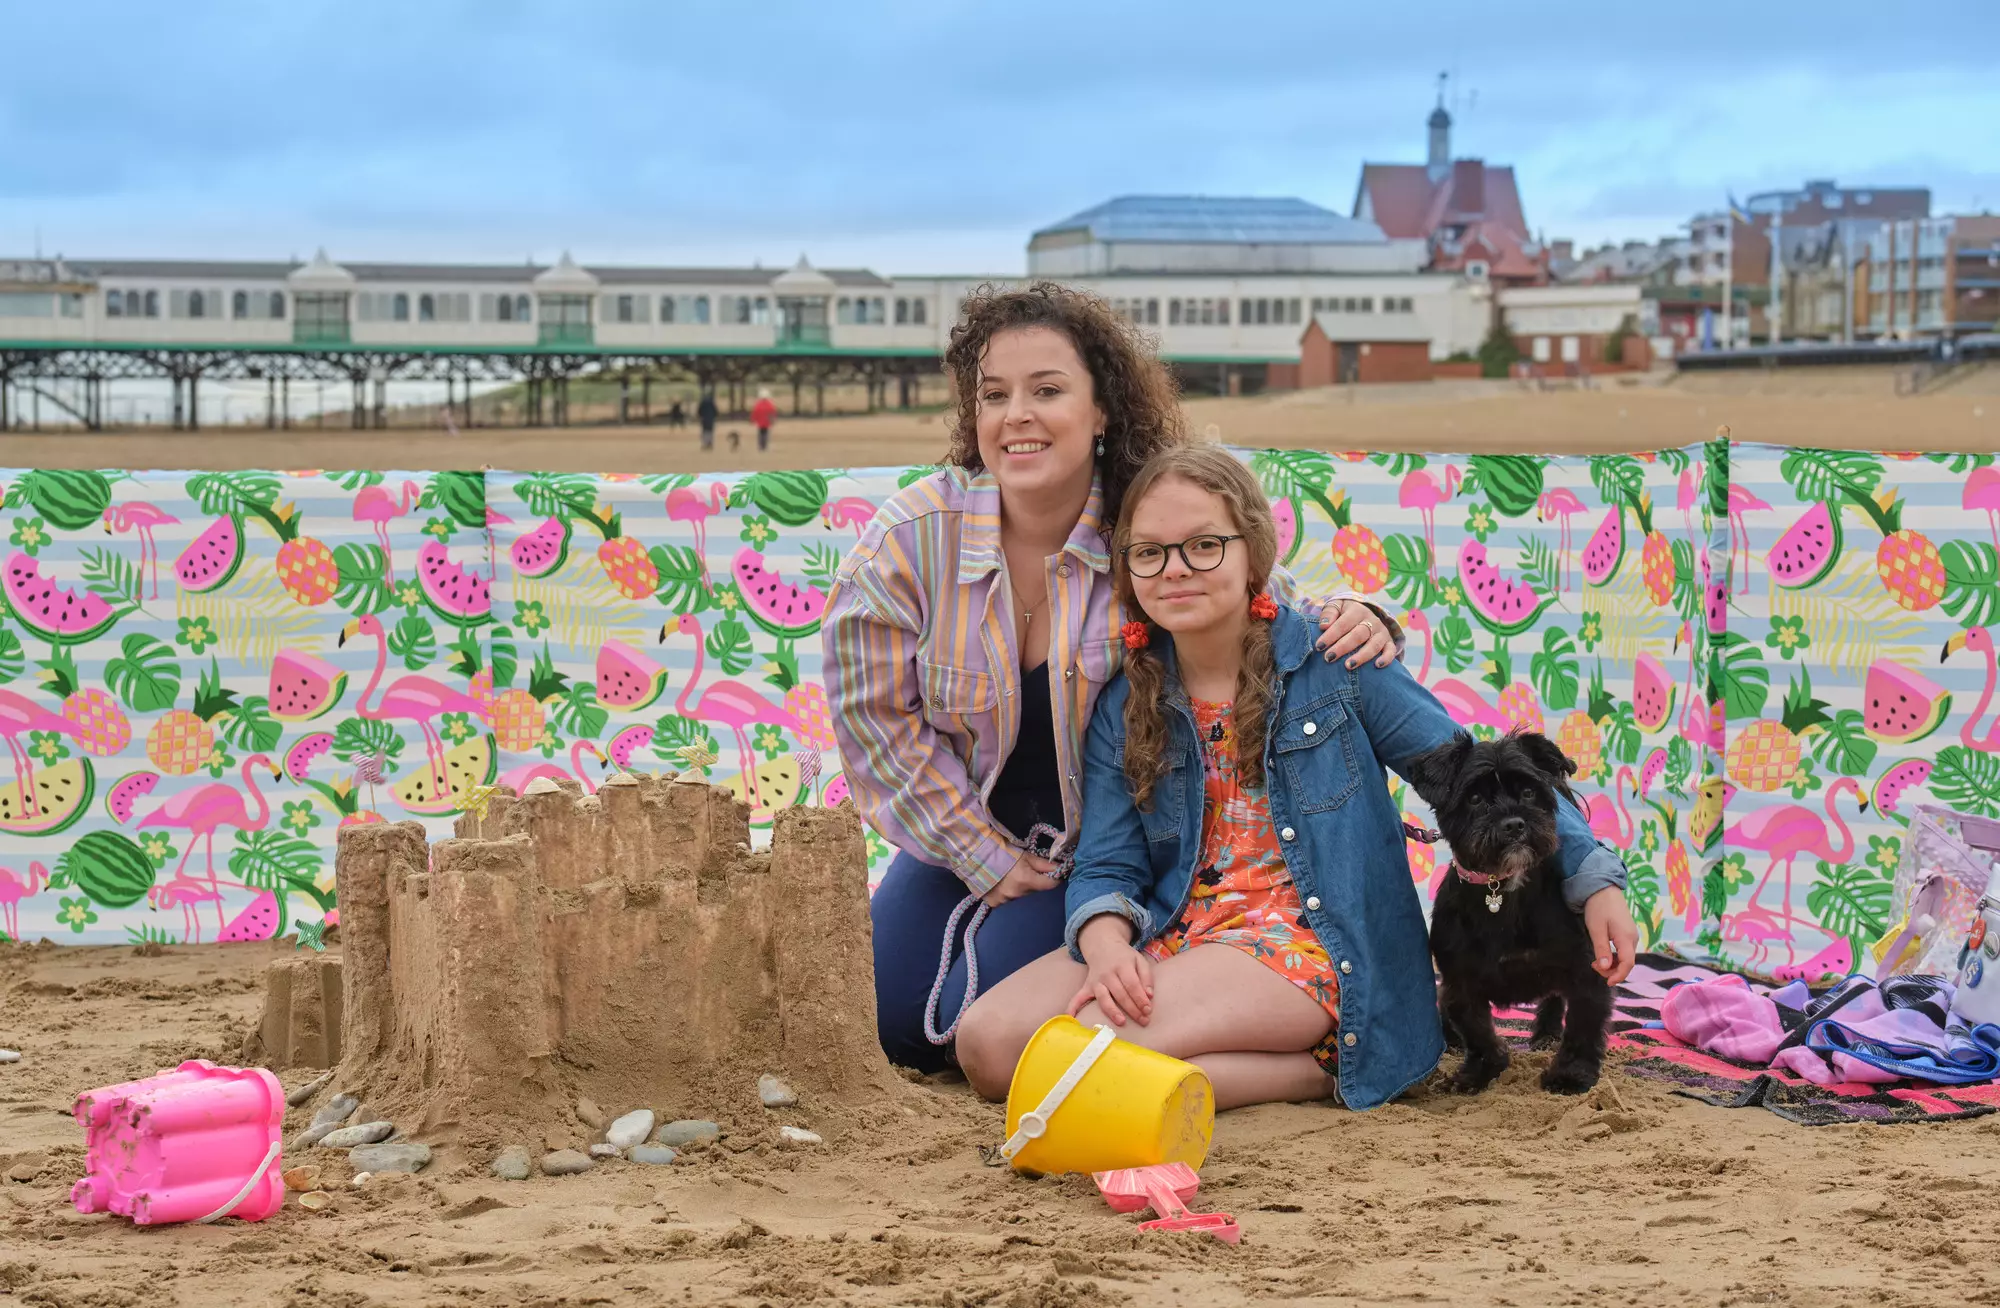 My Mum Tracy Beaker is a three-episode adaption of Jacqueline Wilson's book of the same name, told from the perspective of Tracy's 10-year-old daughter (